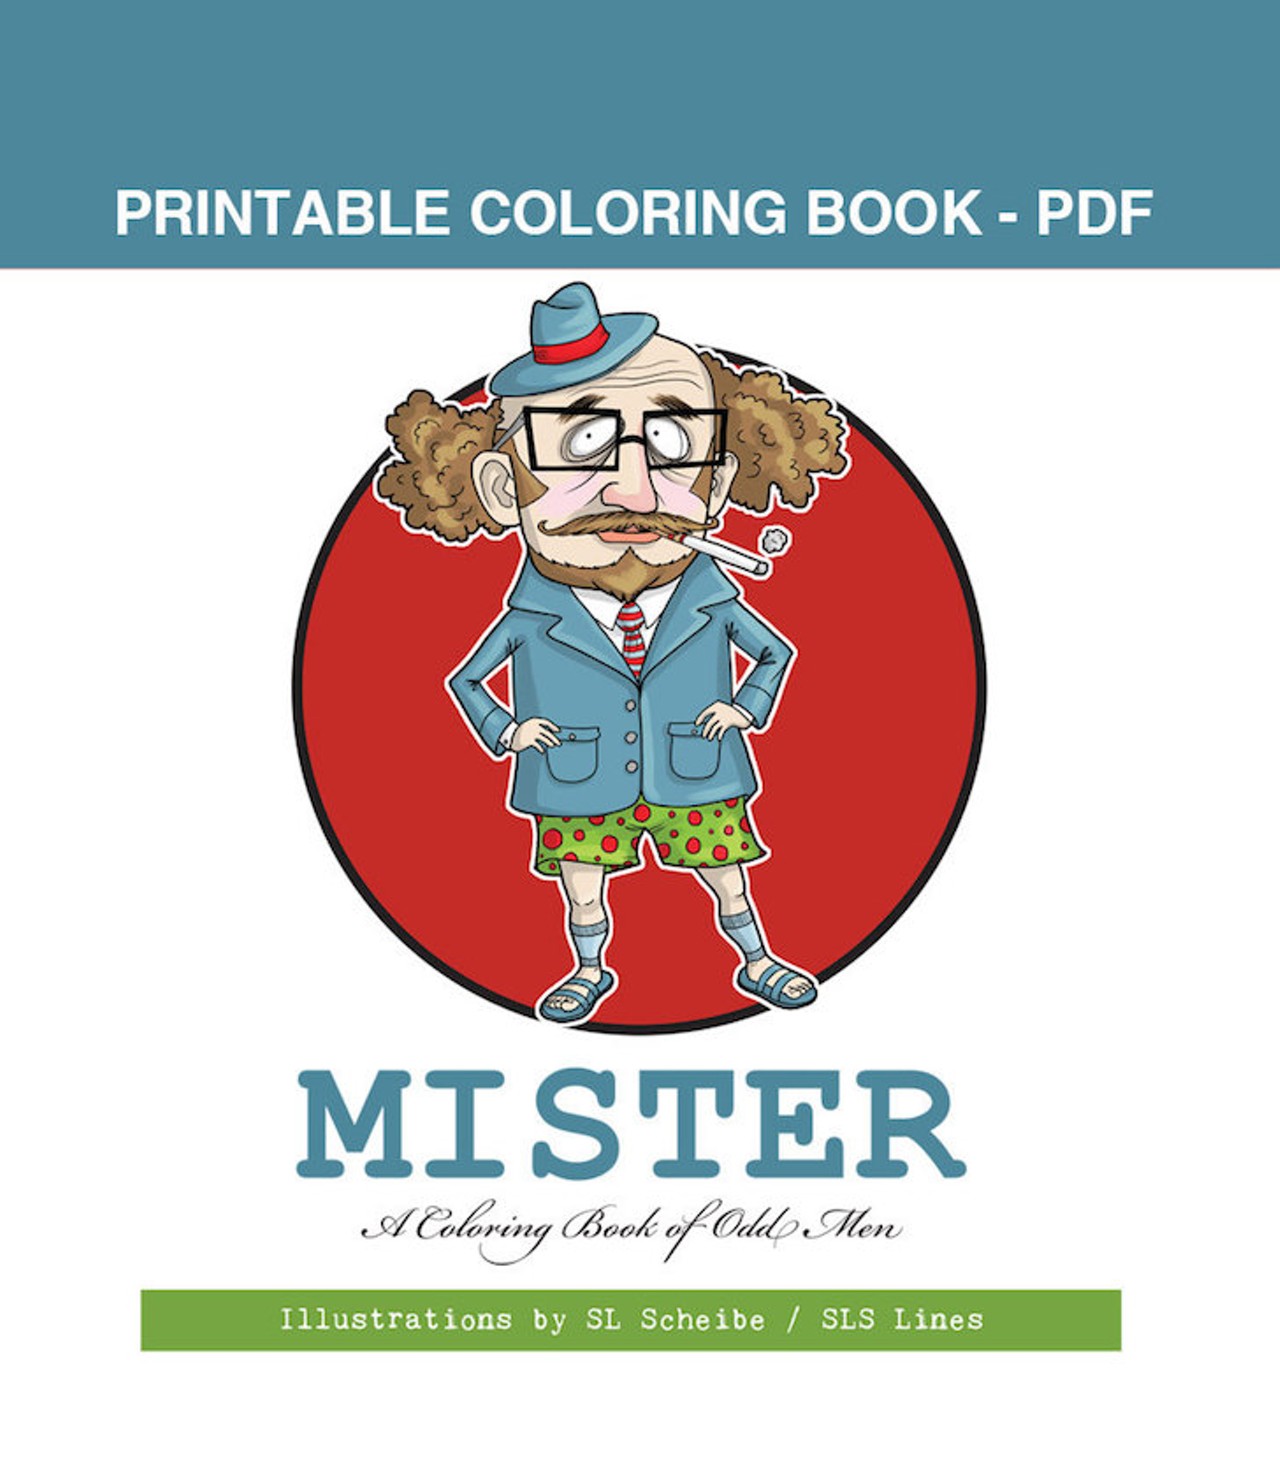  Mister: A Coloring Book of Odd Little Men
Whatever floats your boat &#133;
Buy it at etsy.com 